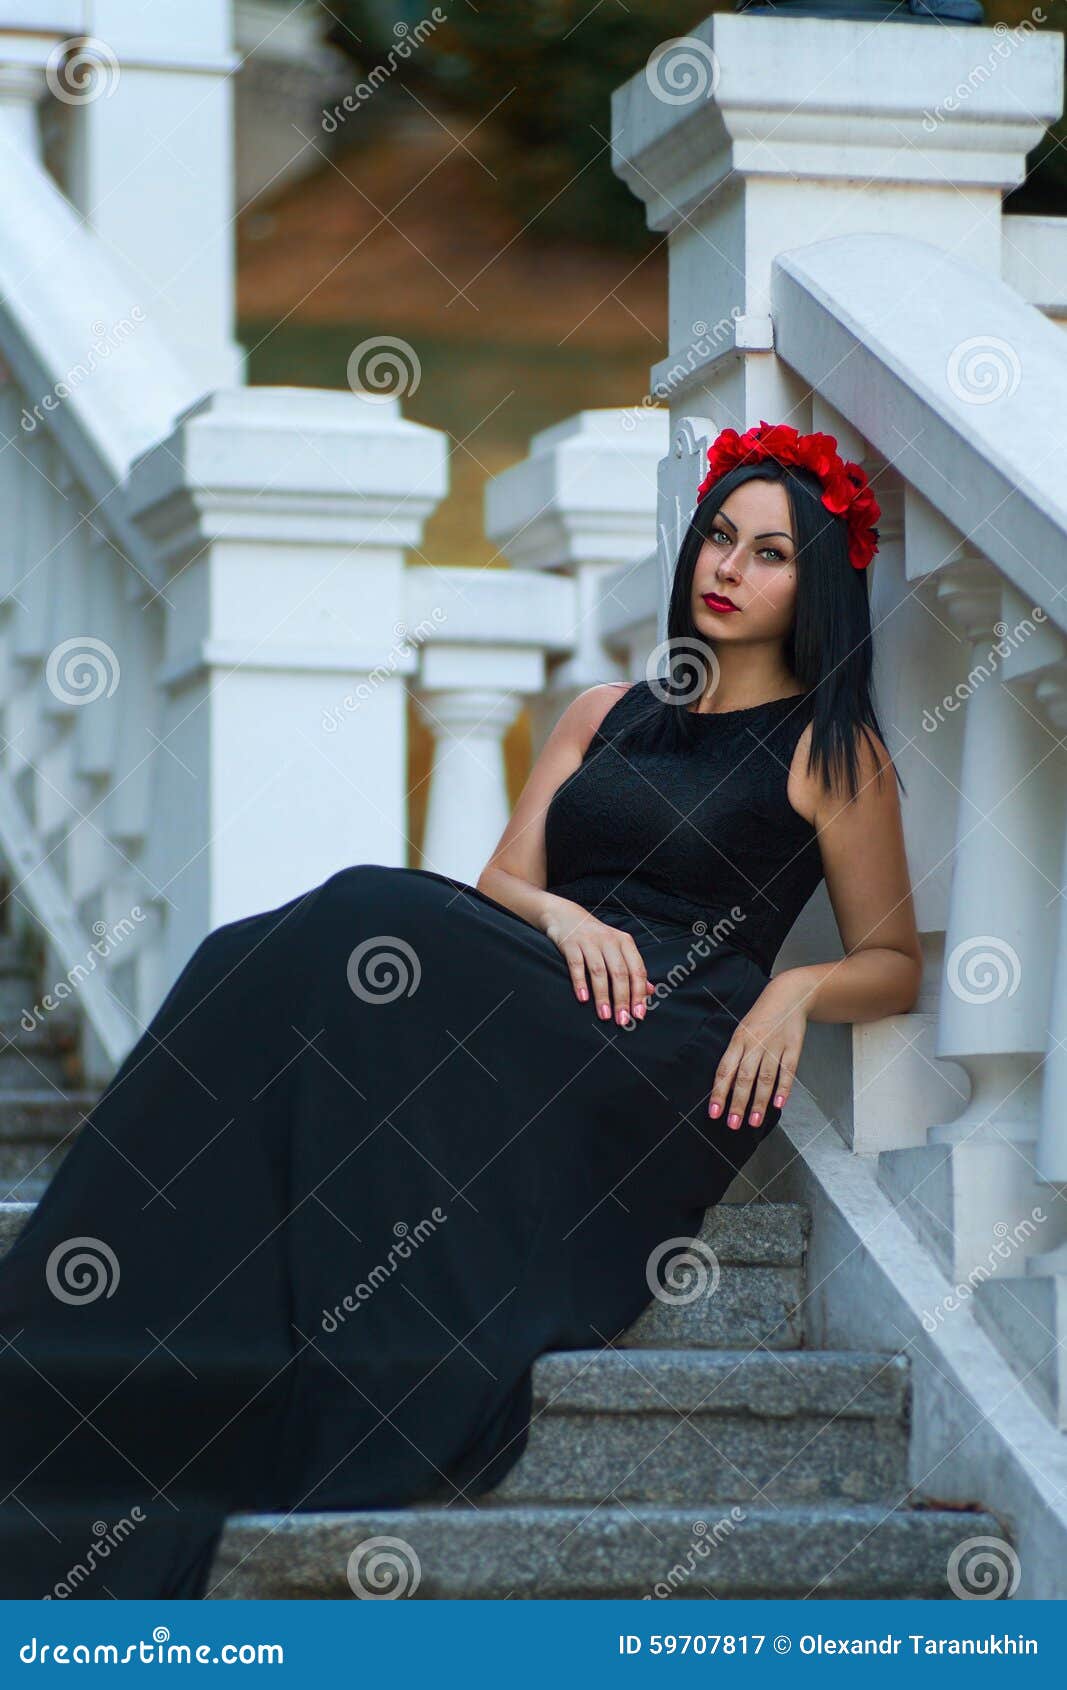 Black haired woman in the dark dress are waiting. Beautiful black haired woman with red flower chaplet are waiting at the stairs